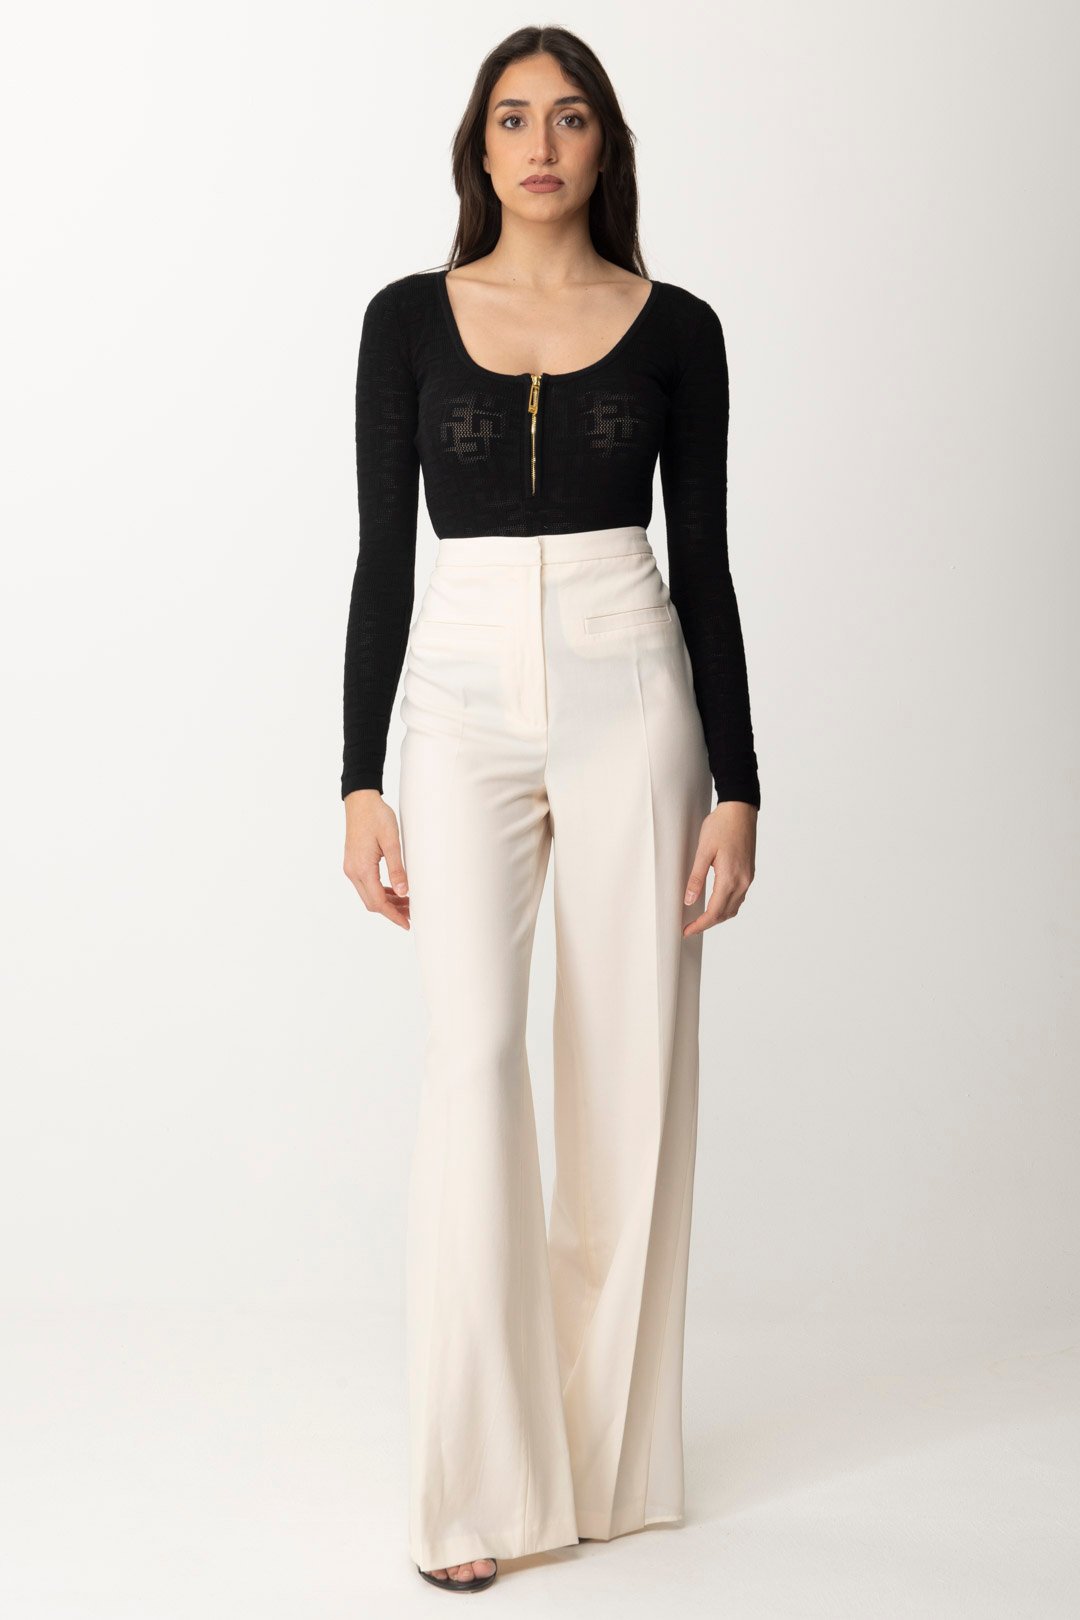 Preview: Elisabetta Franchi Straight trousers in cool wool Burro